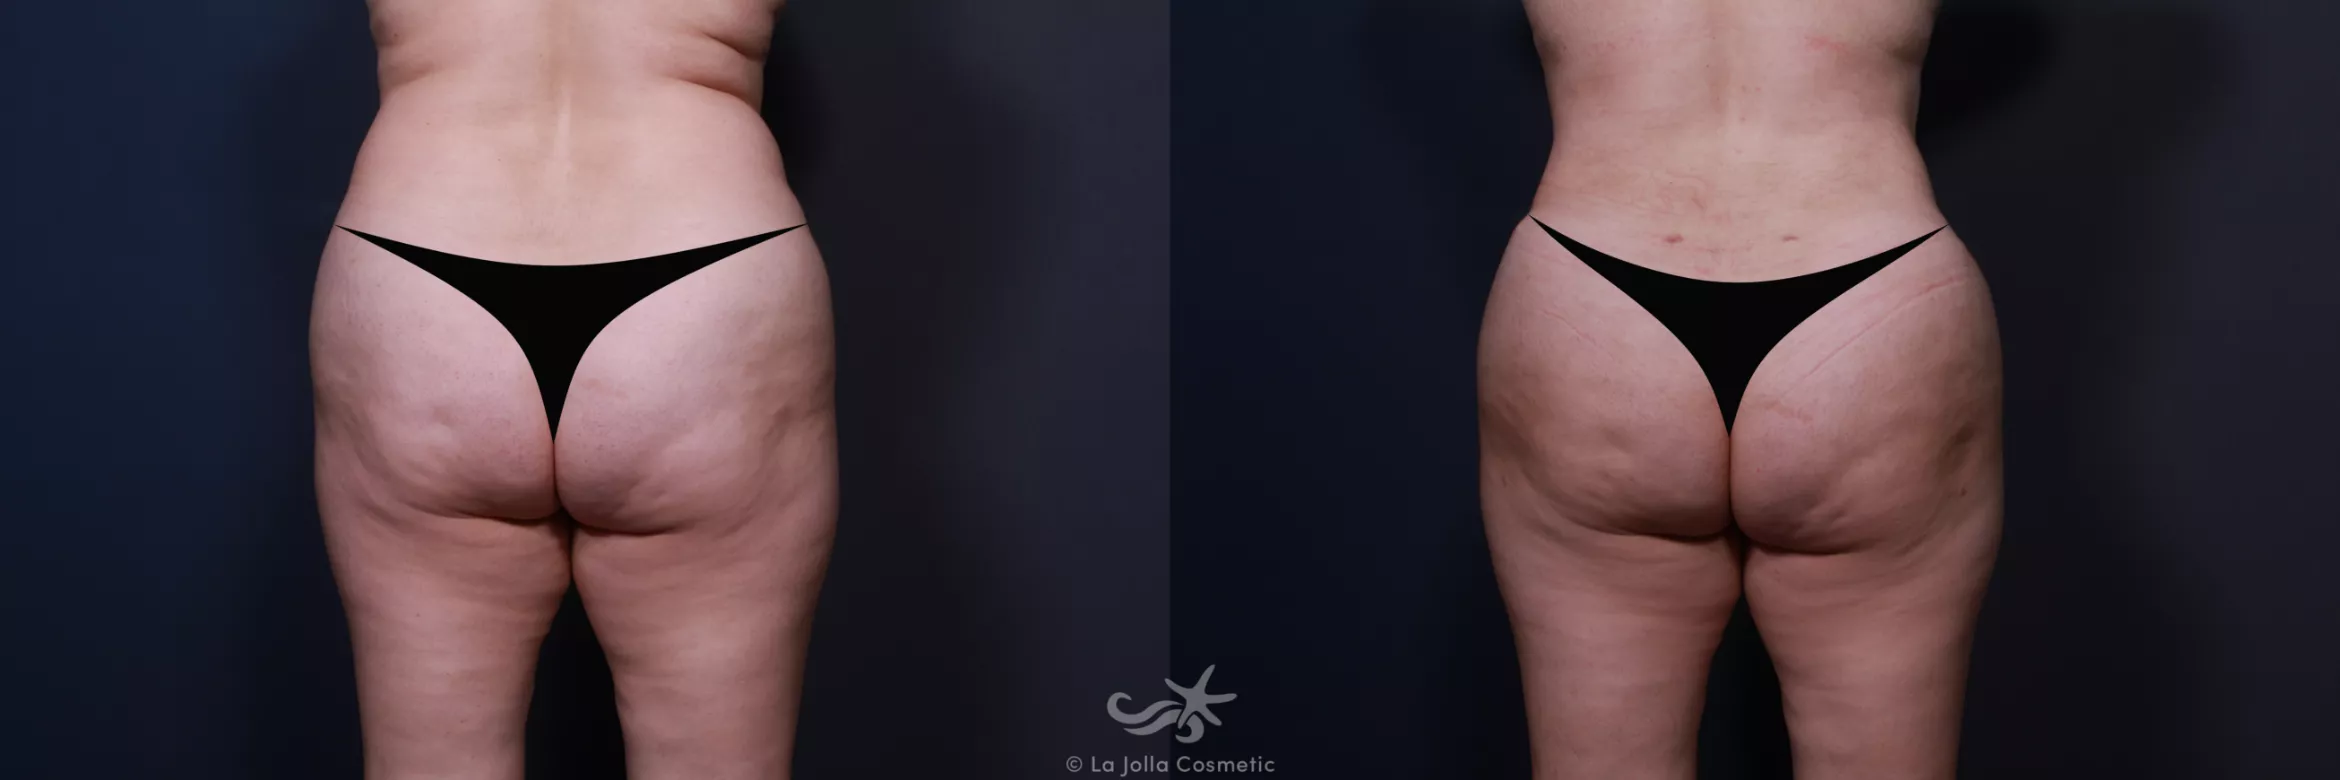 Before & After Tummy Tuck Result 579 Back BBL View in San Diego, CA